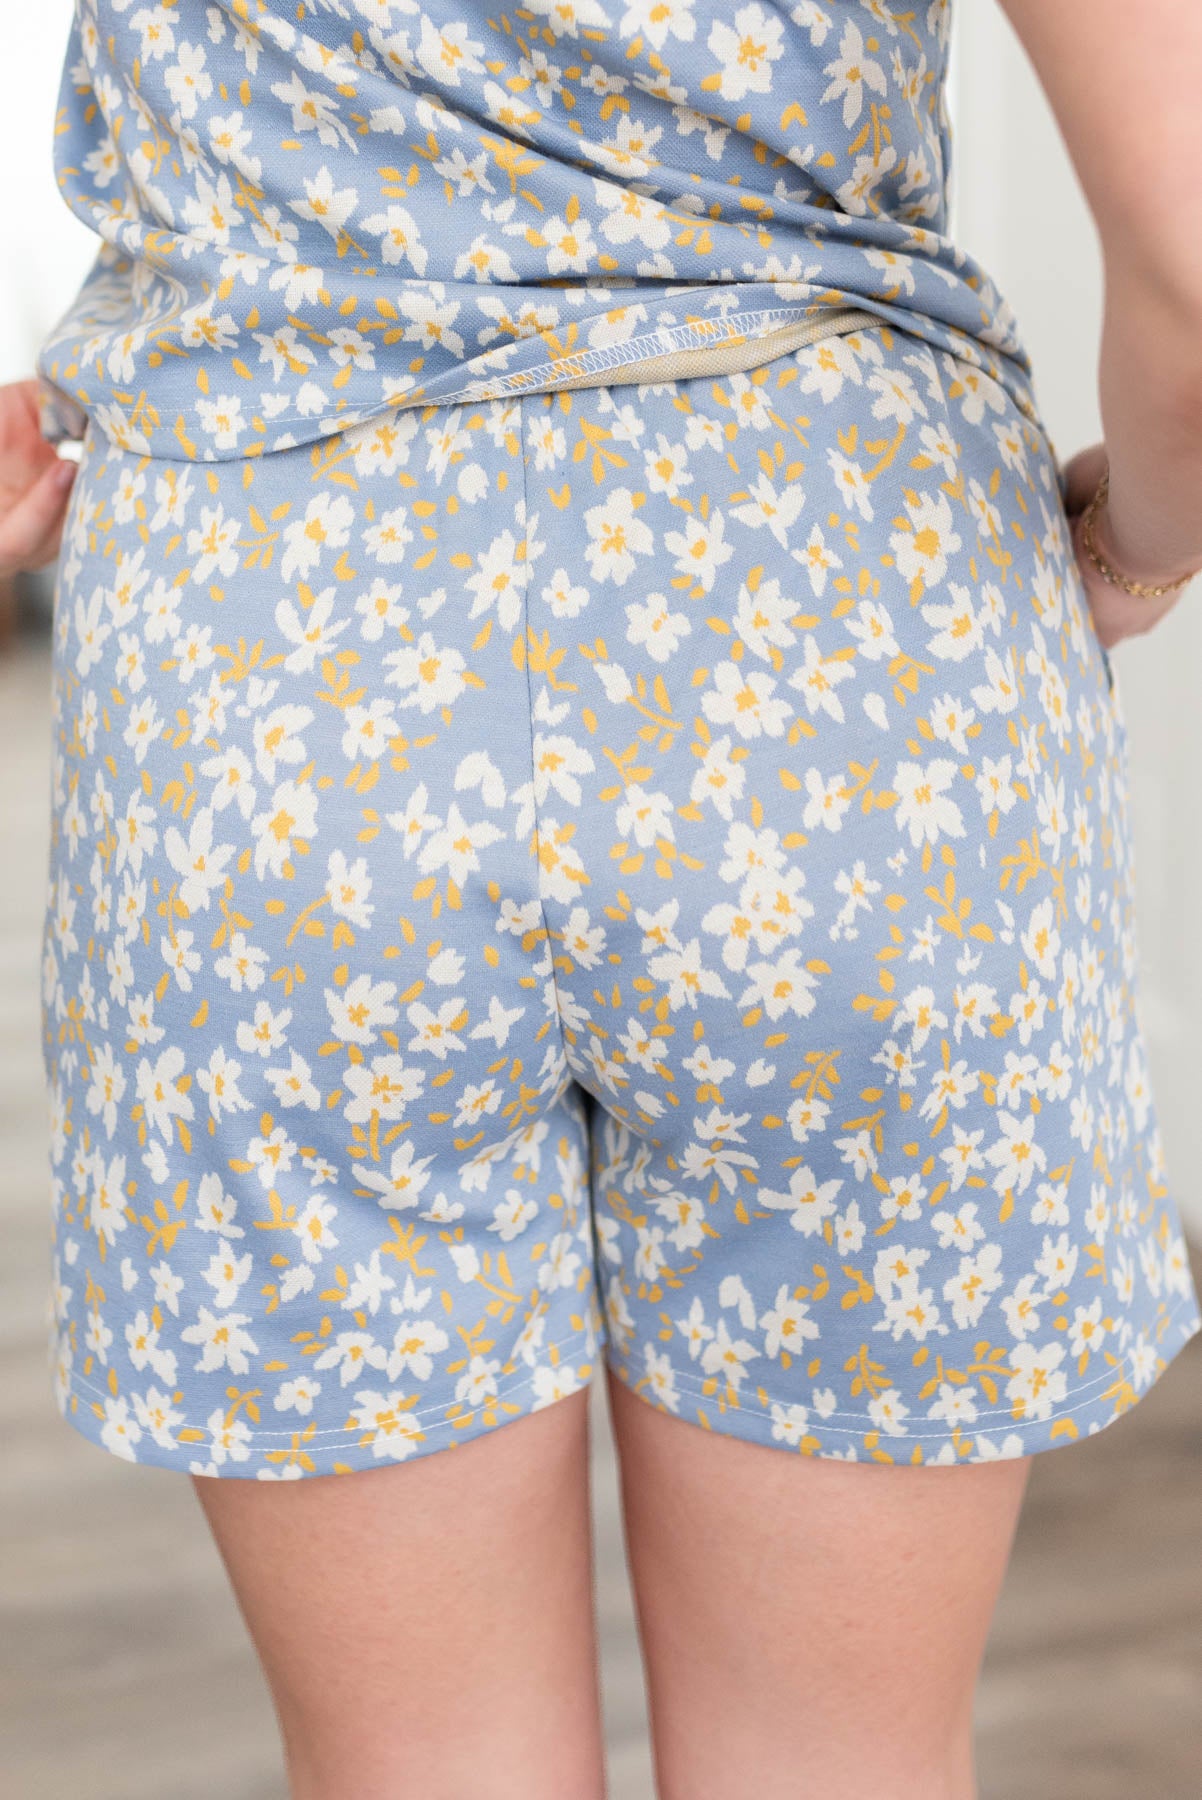 Back view of the blue floral shorts